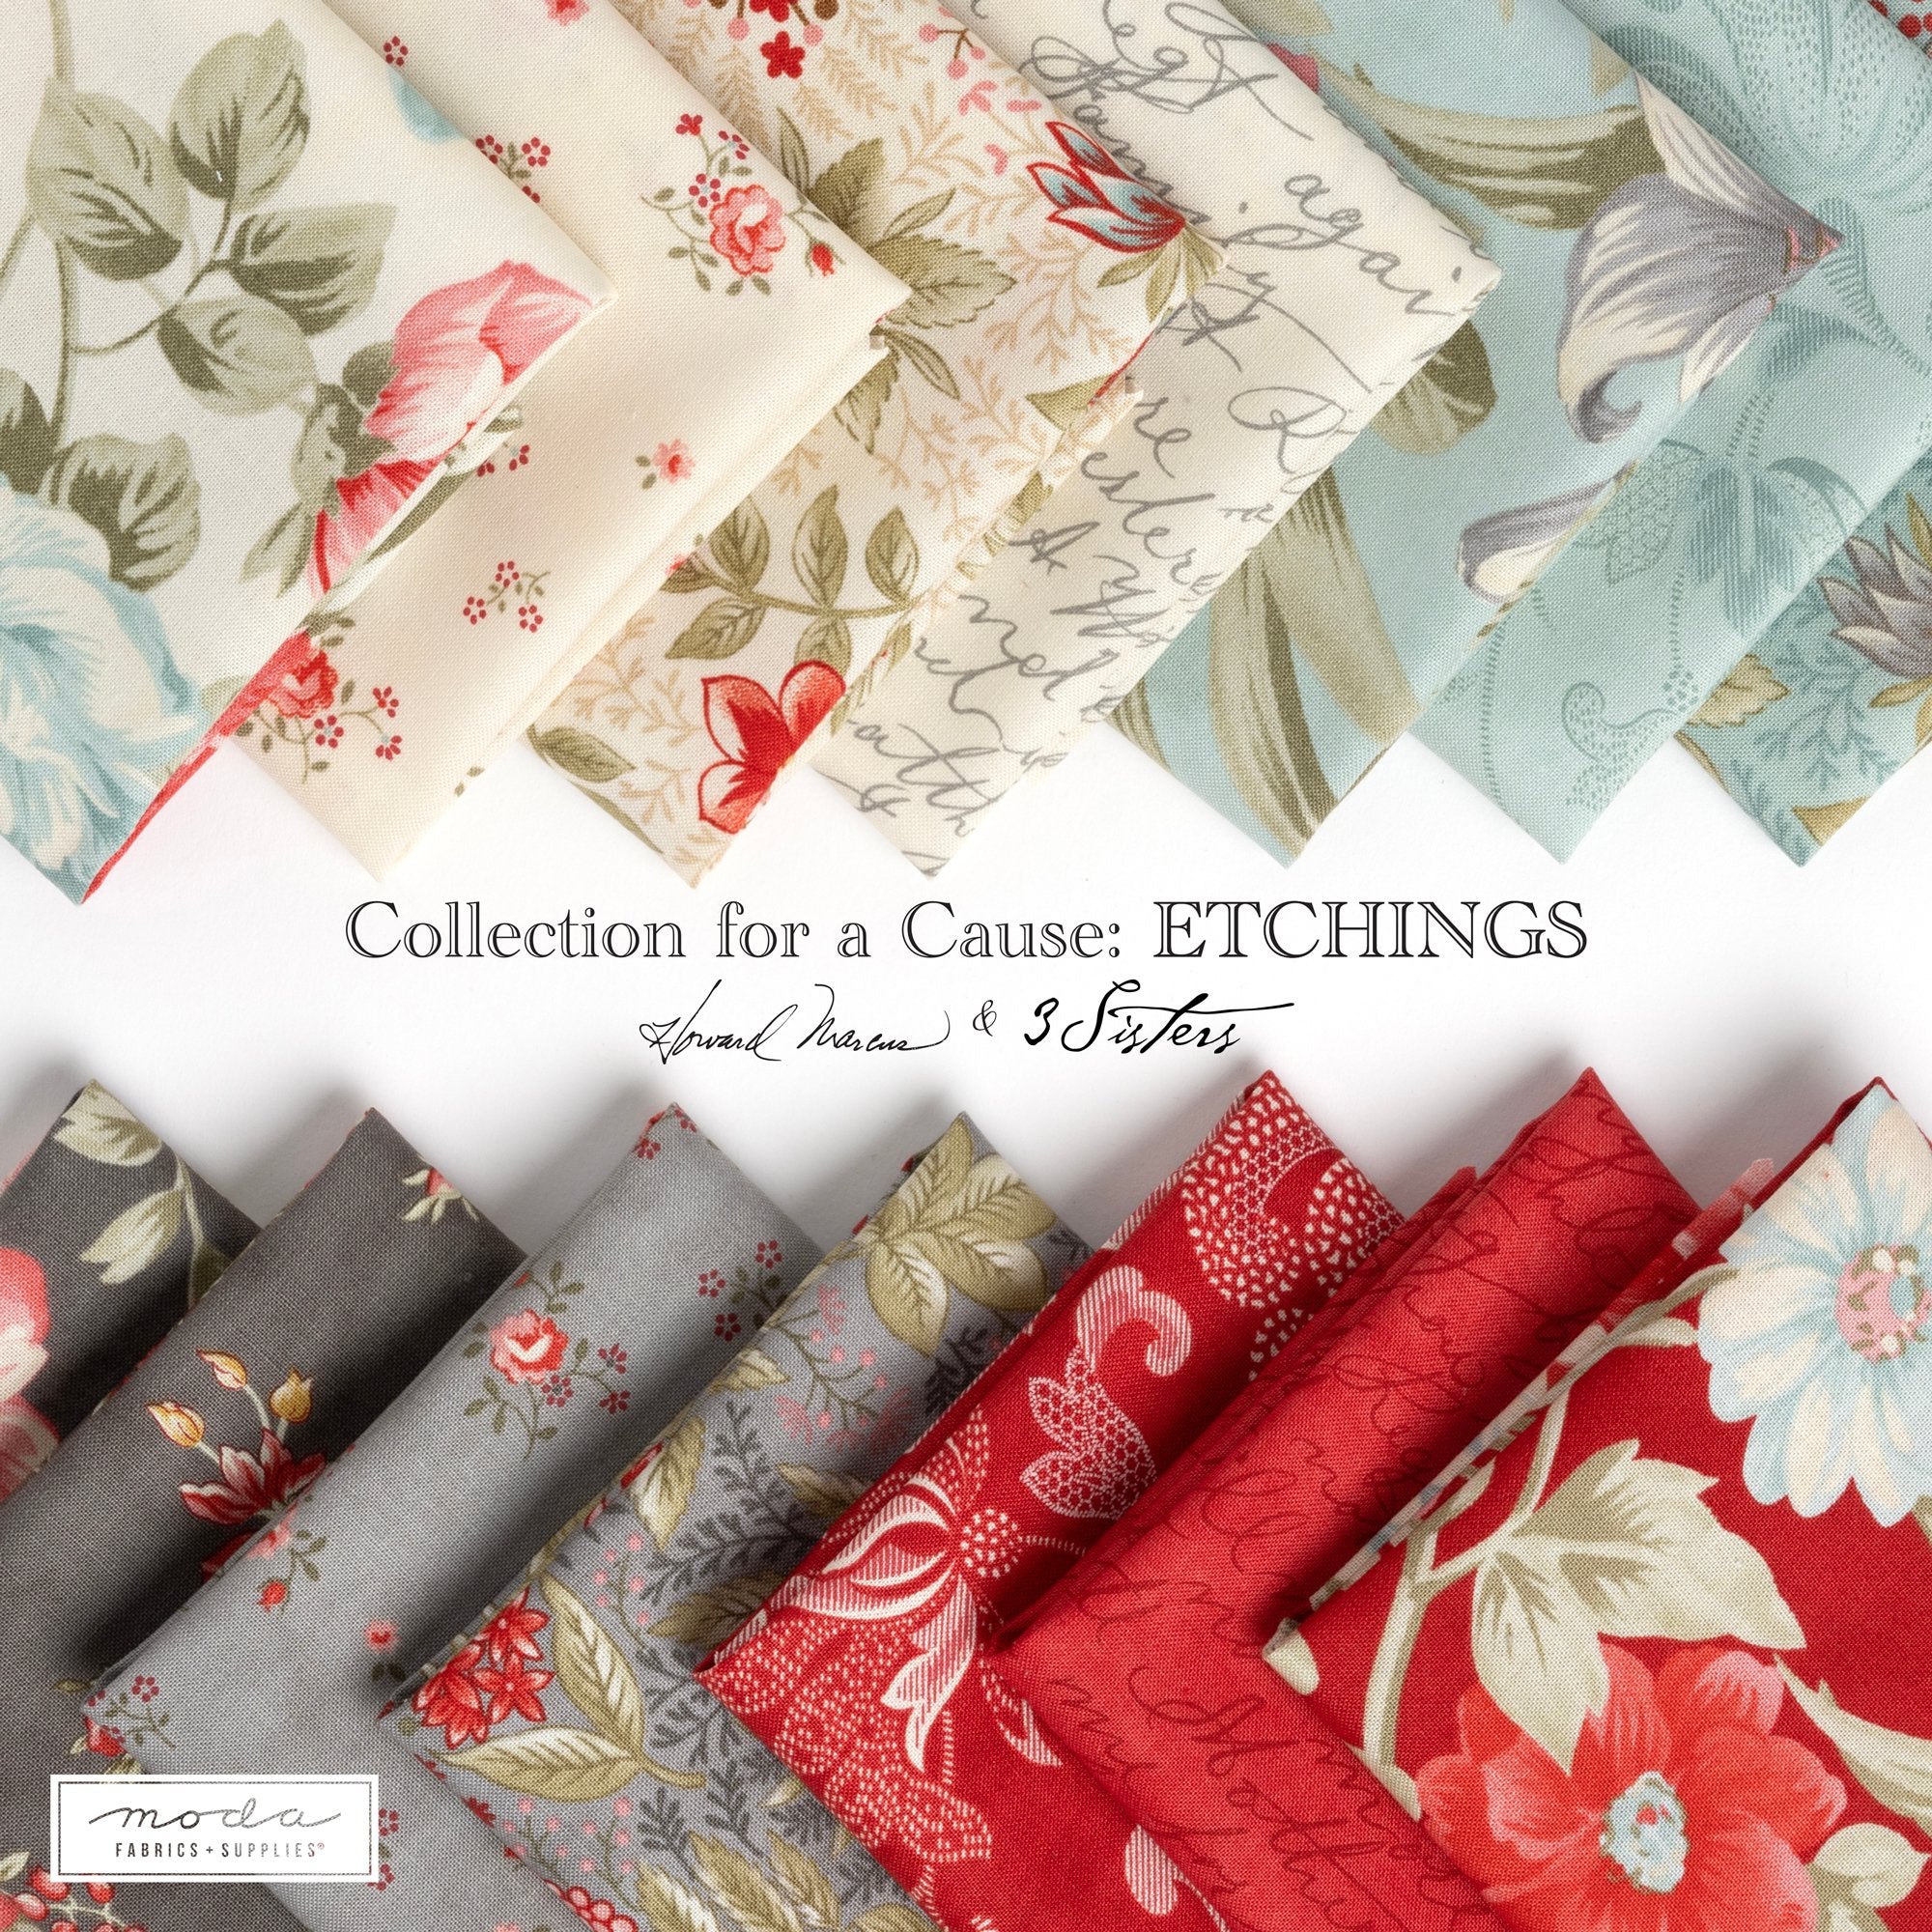 Etchings by Howard Marcus Dunn & 3 Sisters for Moda Fabrics